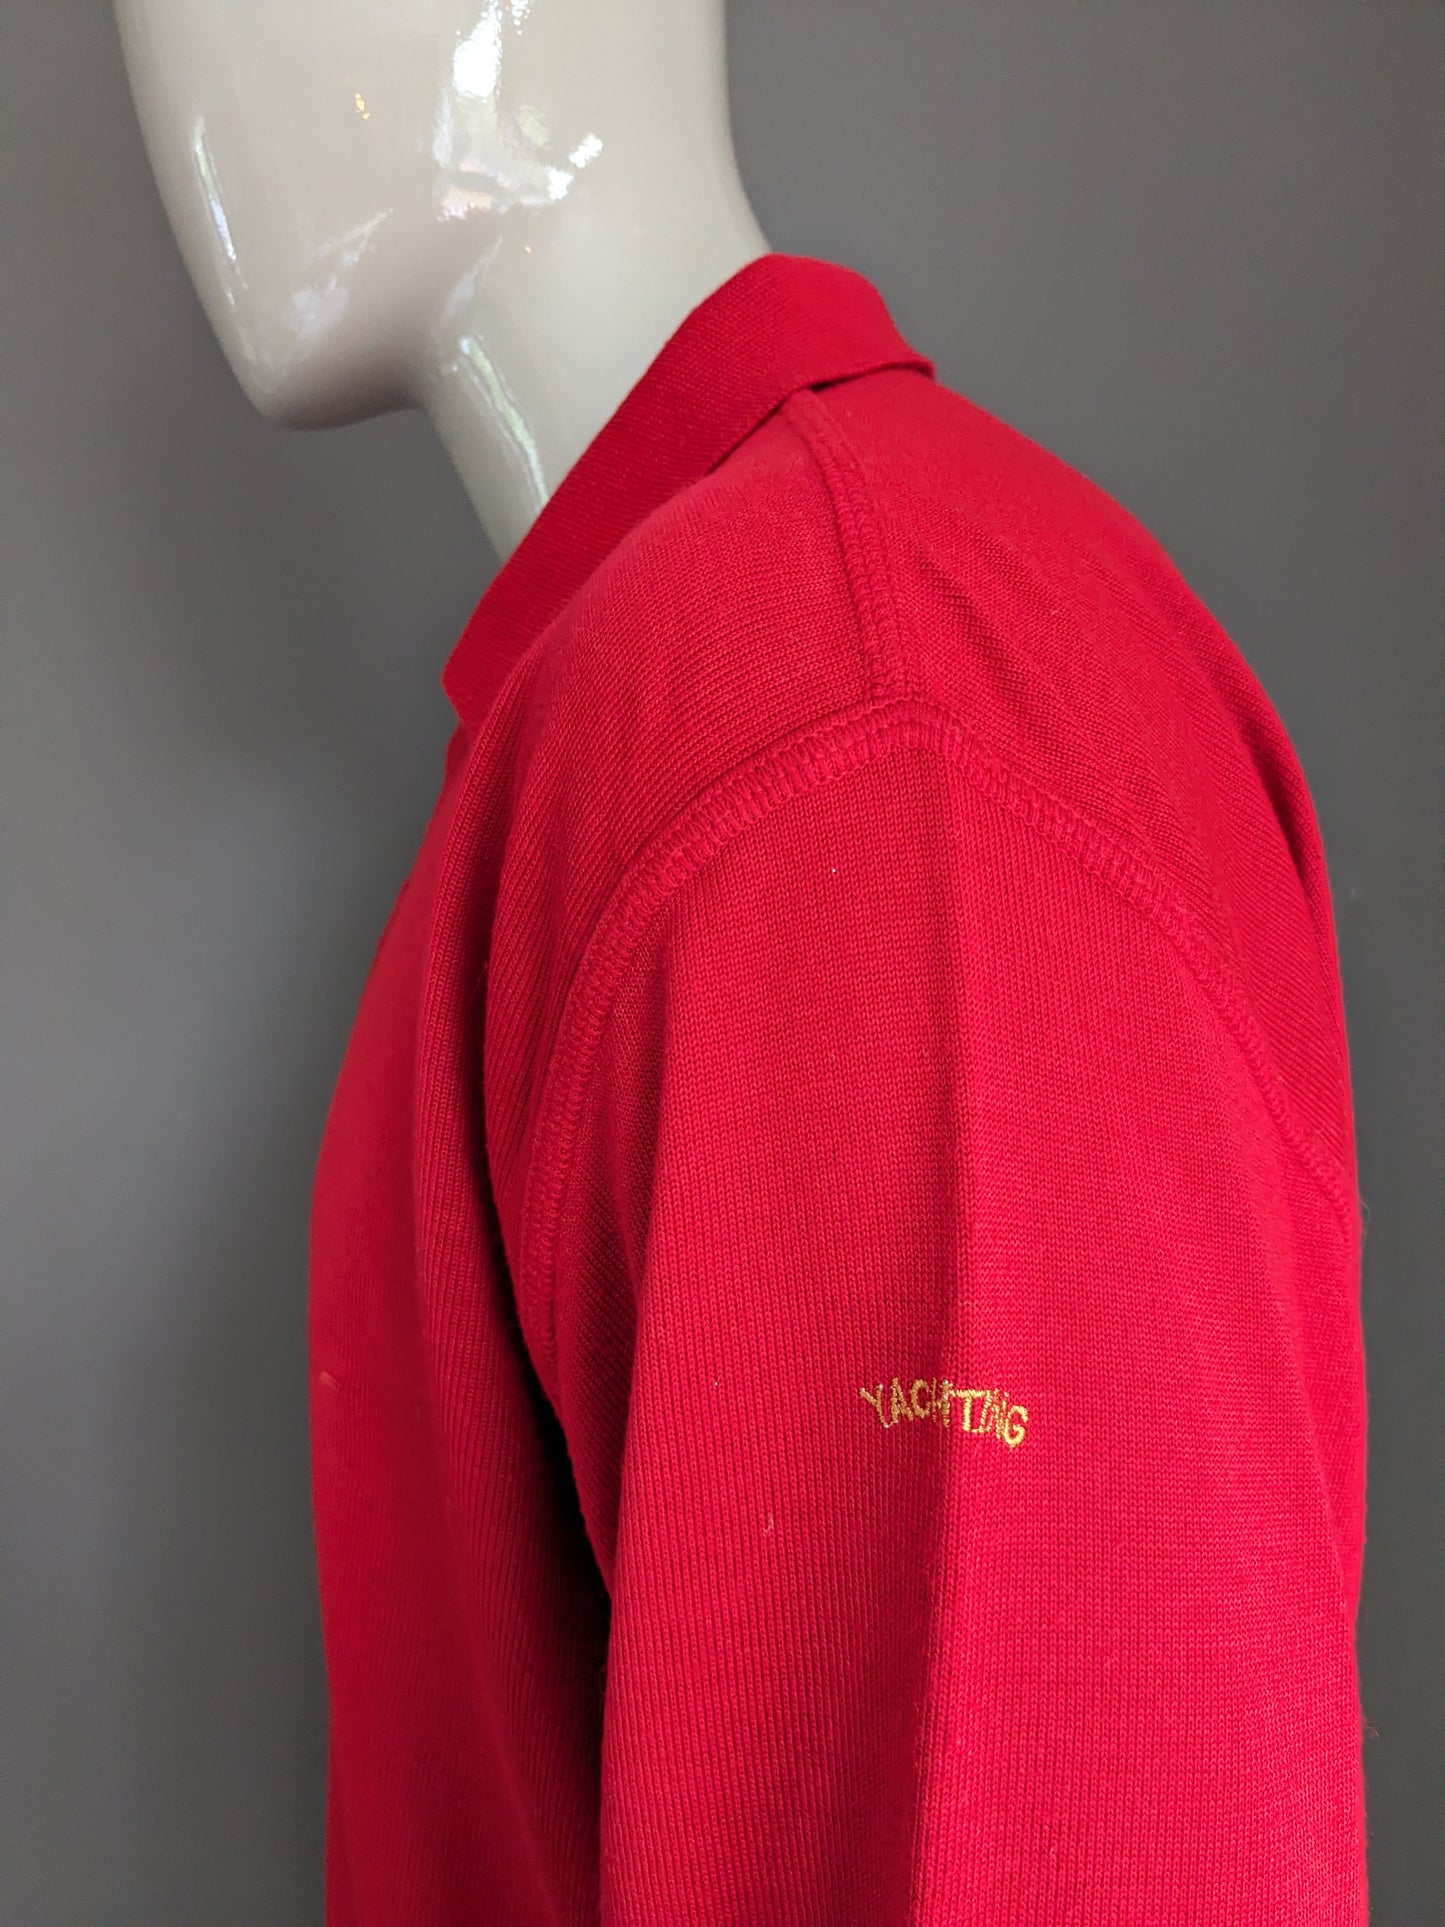 Vintage N.L.F. Wool polo sweater with buttons. Colored red. Size 2XL / XXL. 50% wool.